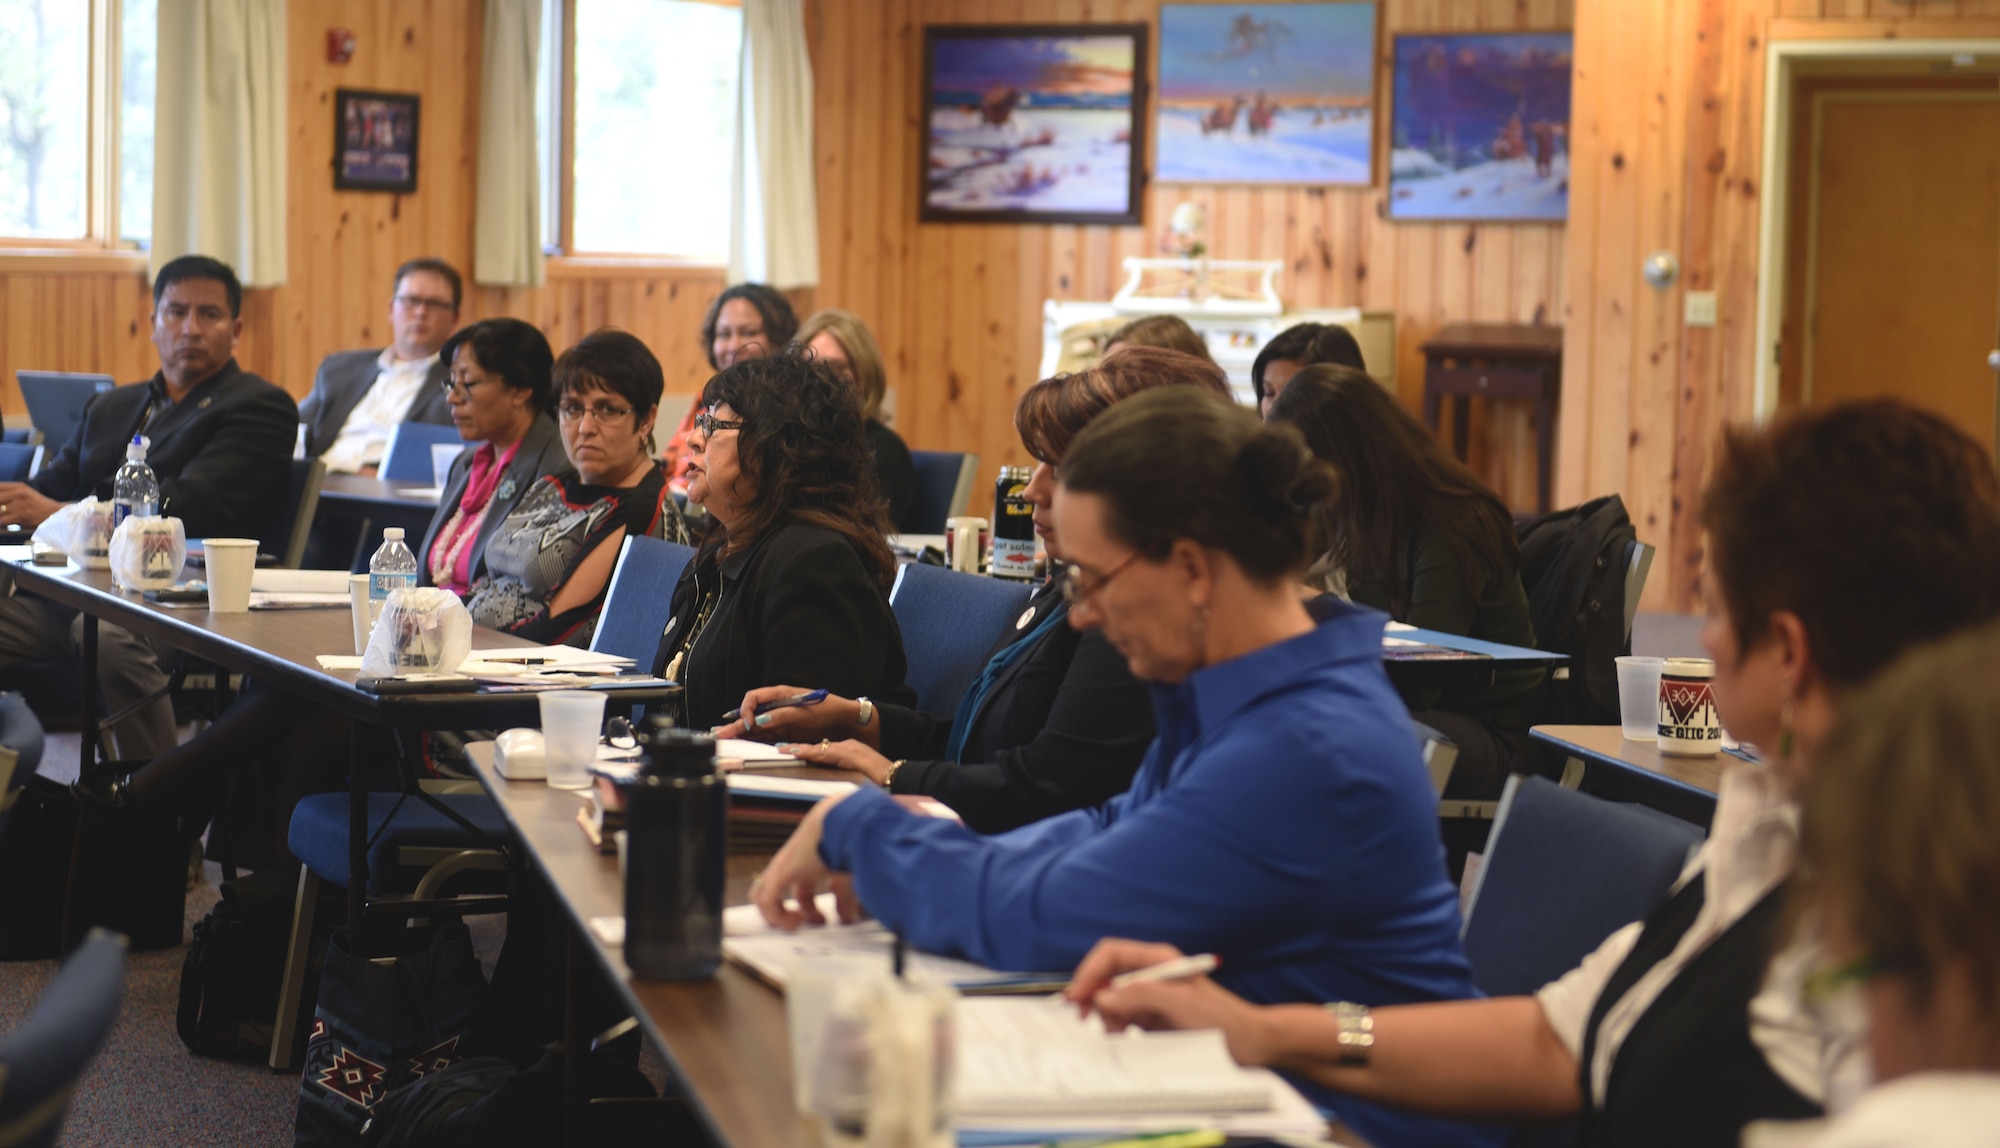 The 2018 Governors' Interstate Indian Council assembly was hosted at the Crazy Horse Memorial in Custer County, S.D., Sept. 26, 2018. Attendees discussed topics such as burial protection status, tax reimbursement and tribal relations in their respective states. (U.S. Air Force photo by Airman Christina M. Bennett)